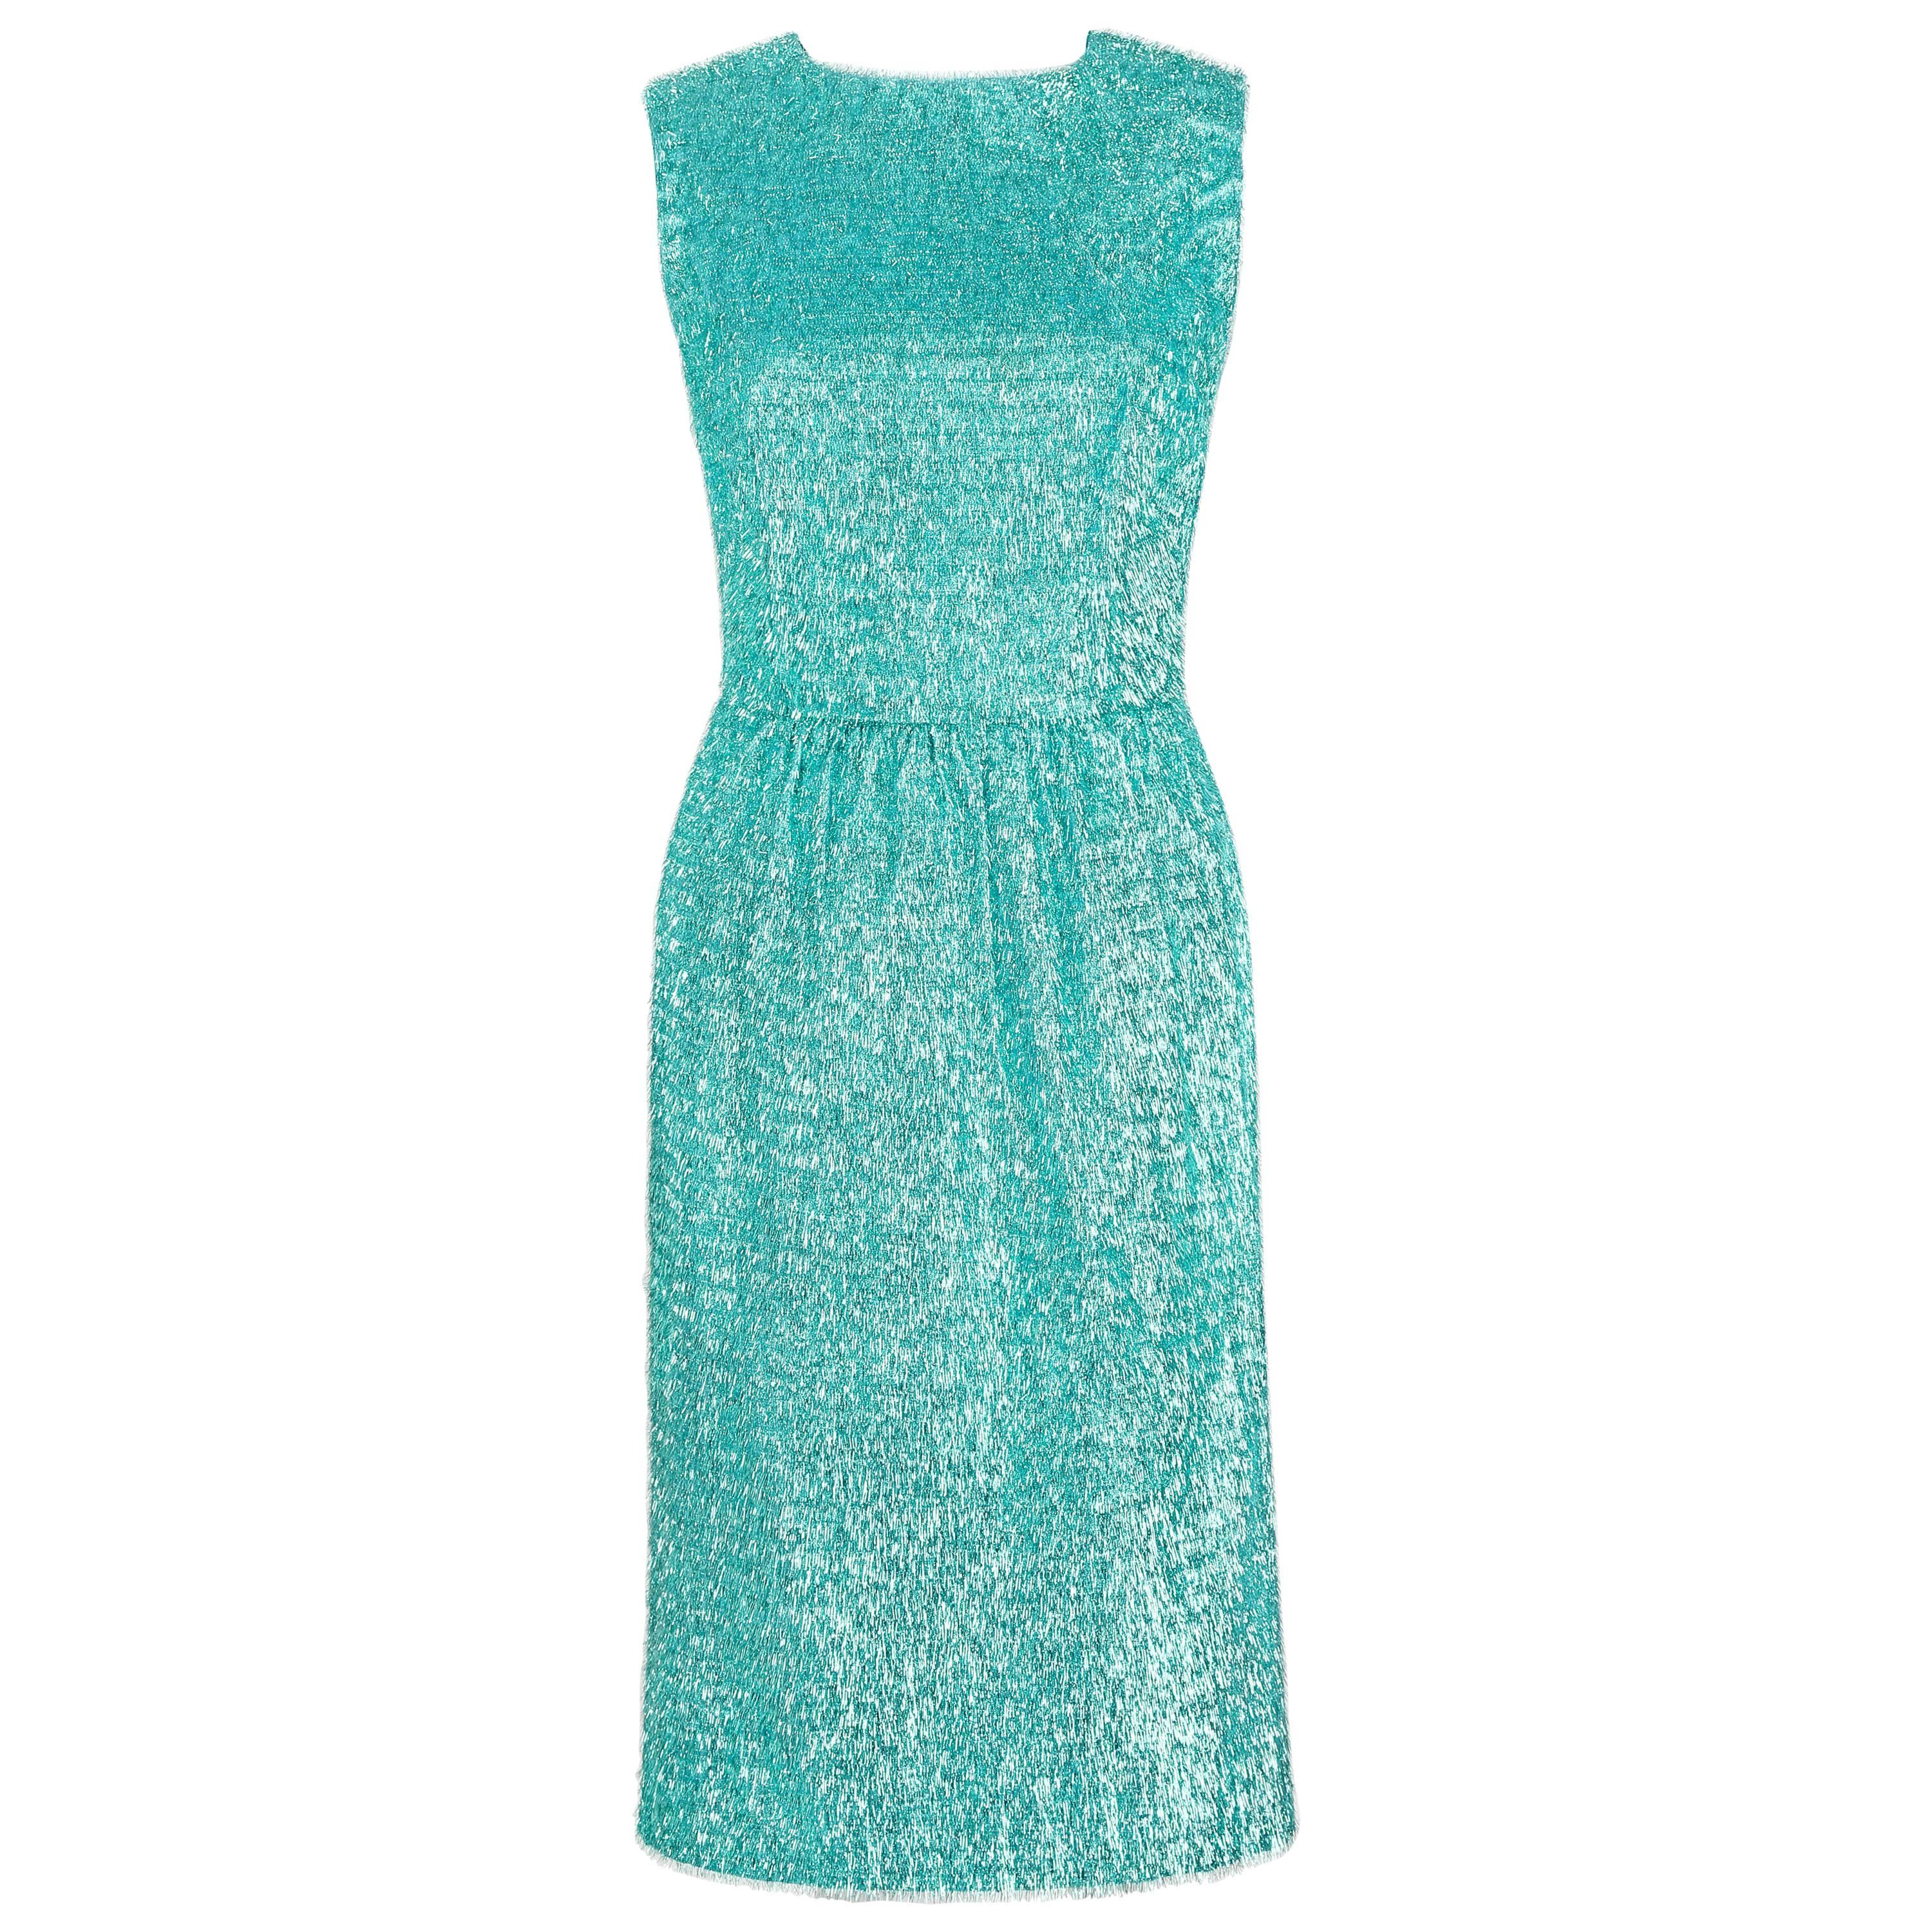 COUTURE c.1960's Turquoise Blue Metallic Tinsel Cocktail Party Shift Dress For Sale